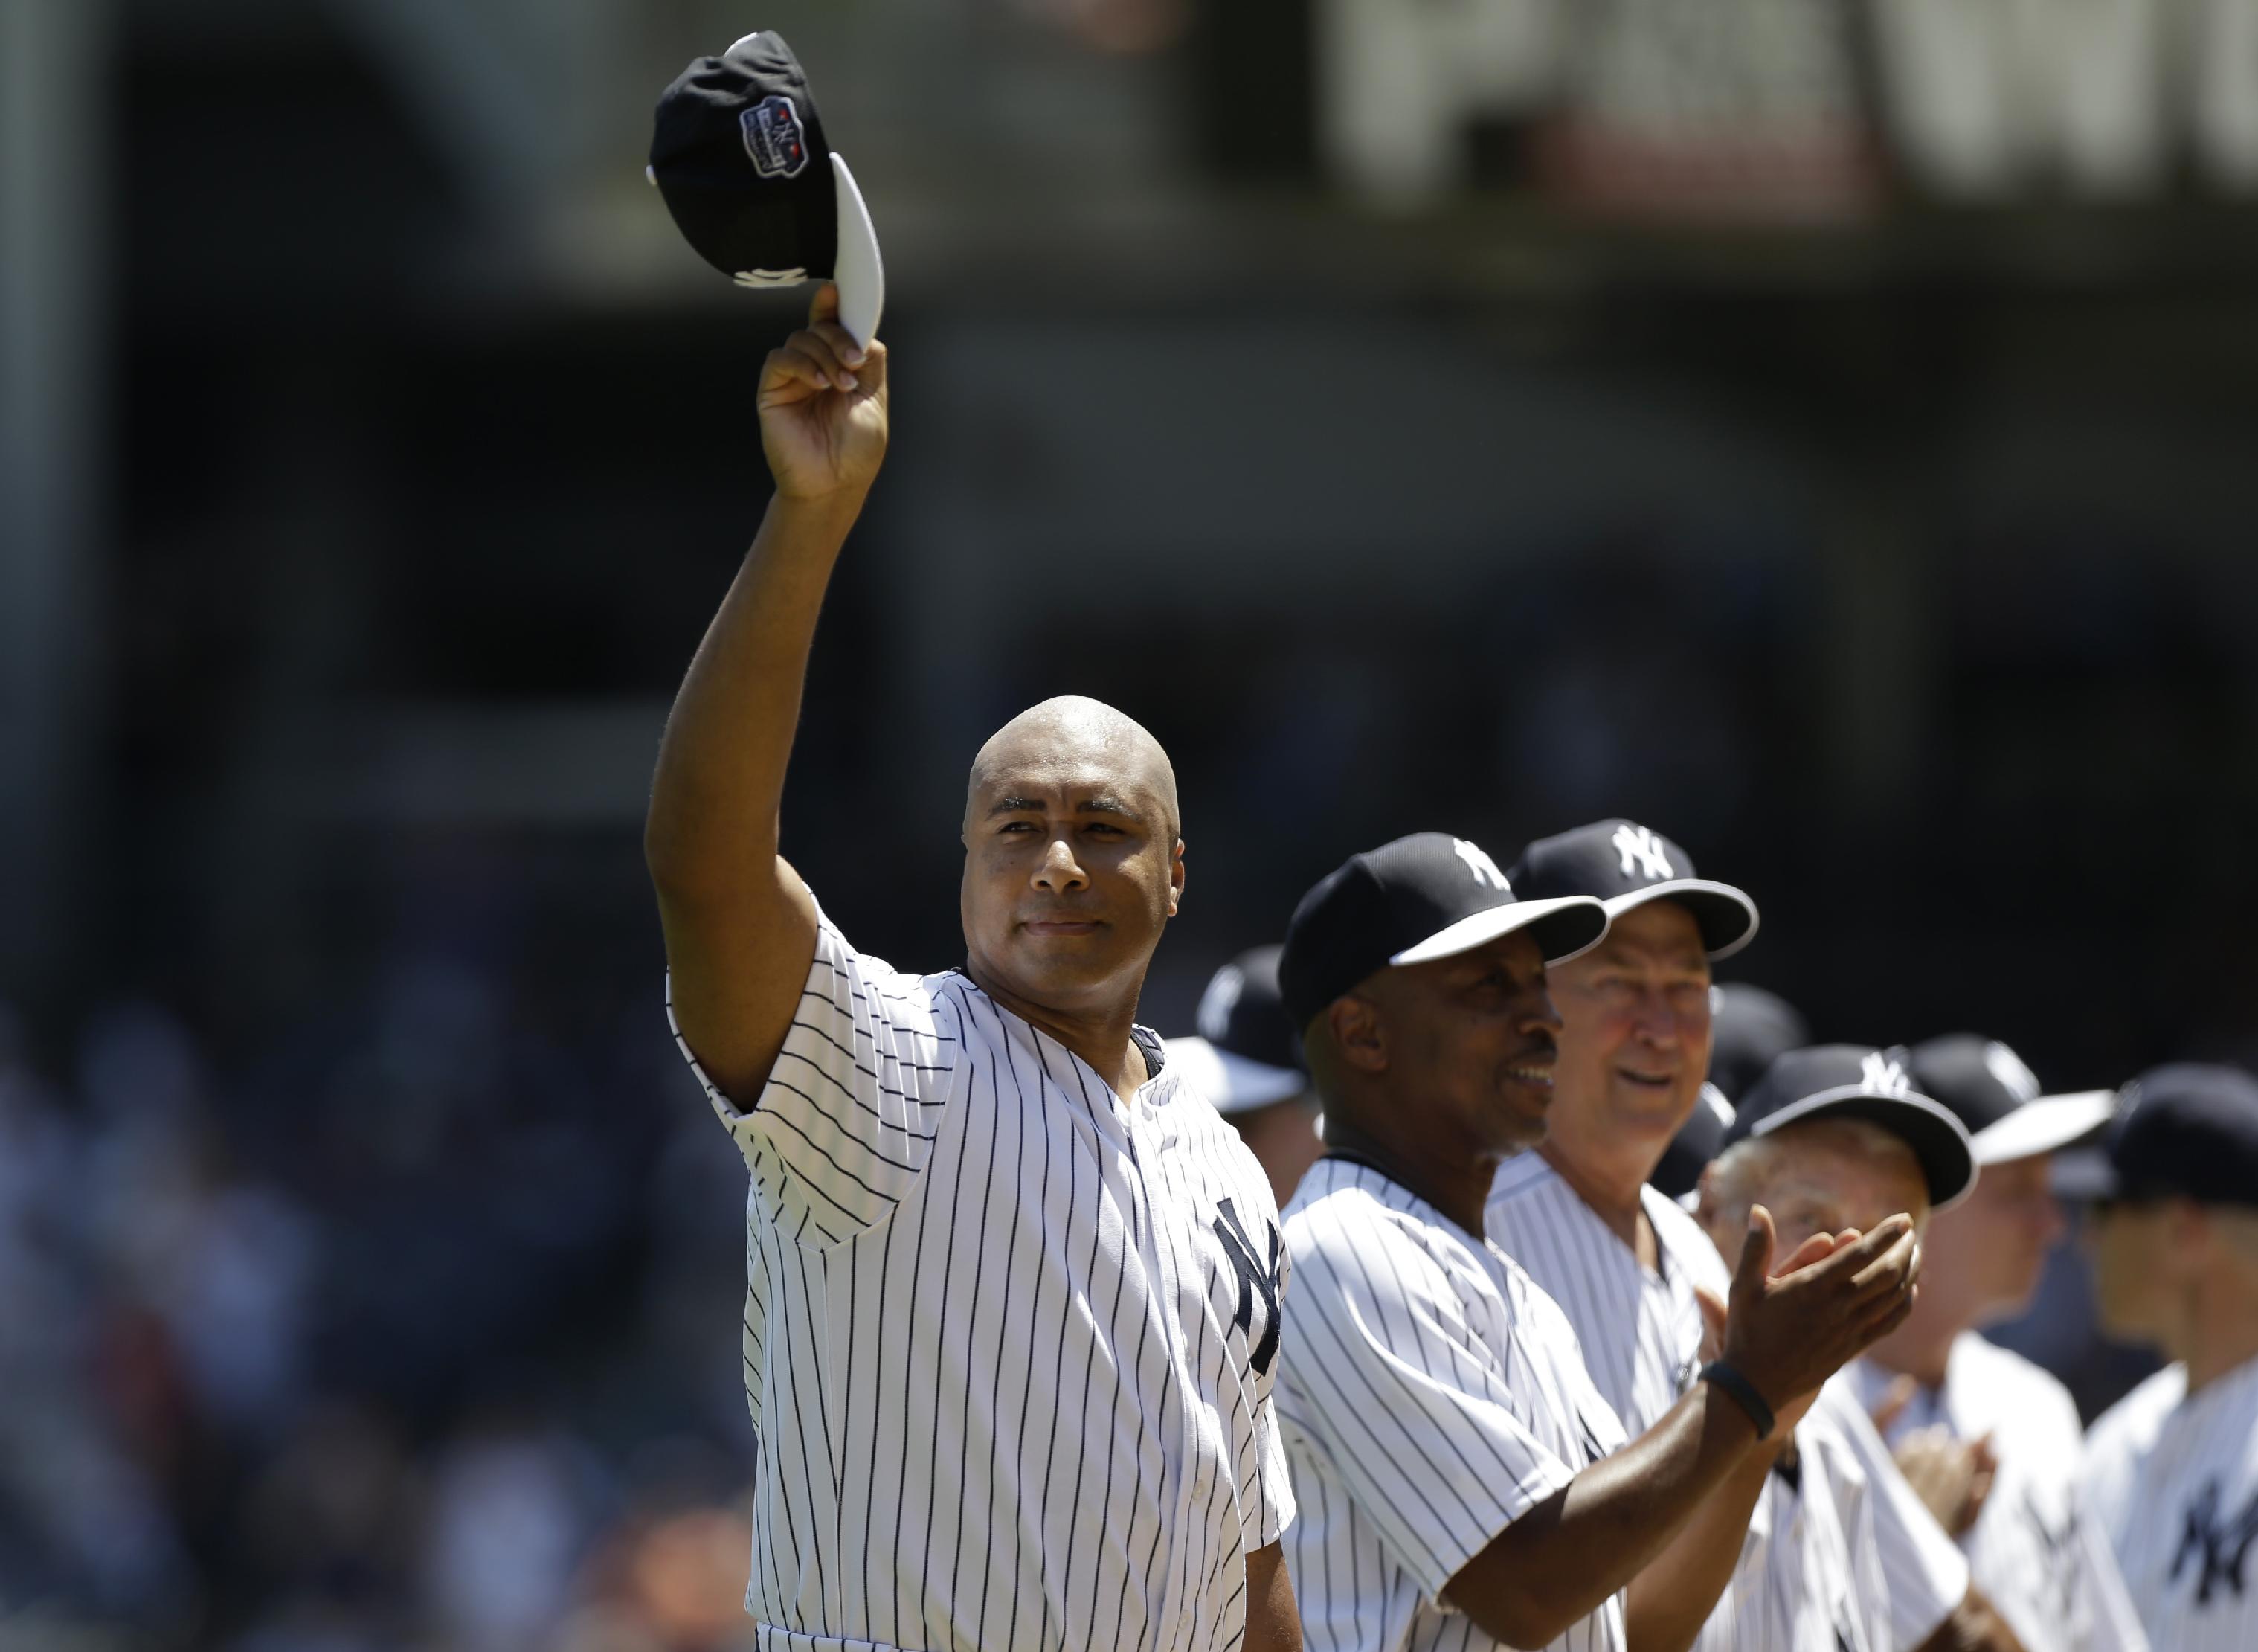 Bernie Williams waving his cap as he is introduced before the Yankees Old Timers Day baseball game in 2012. (AP)